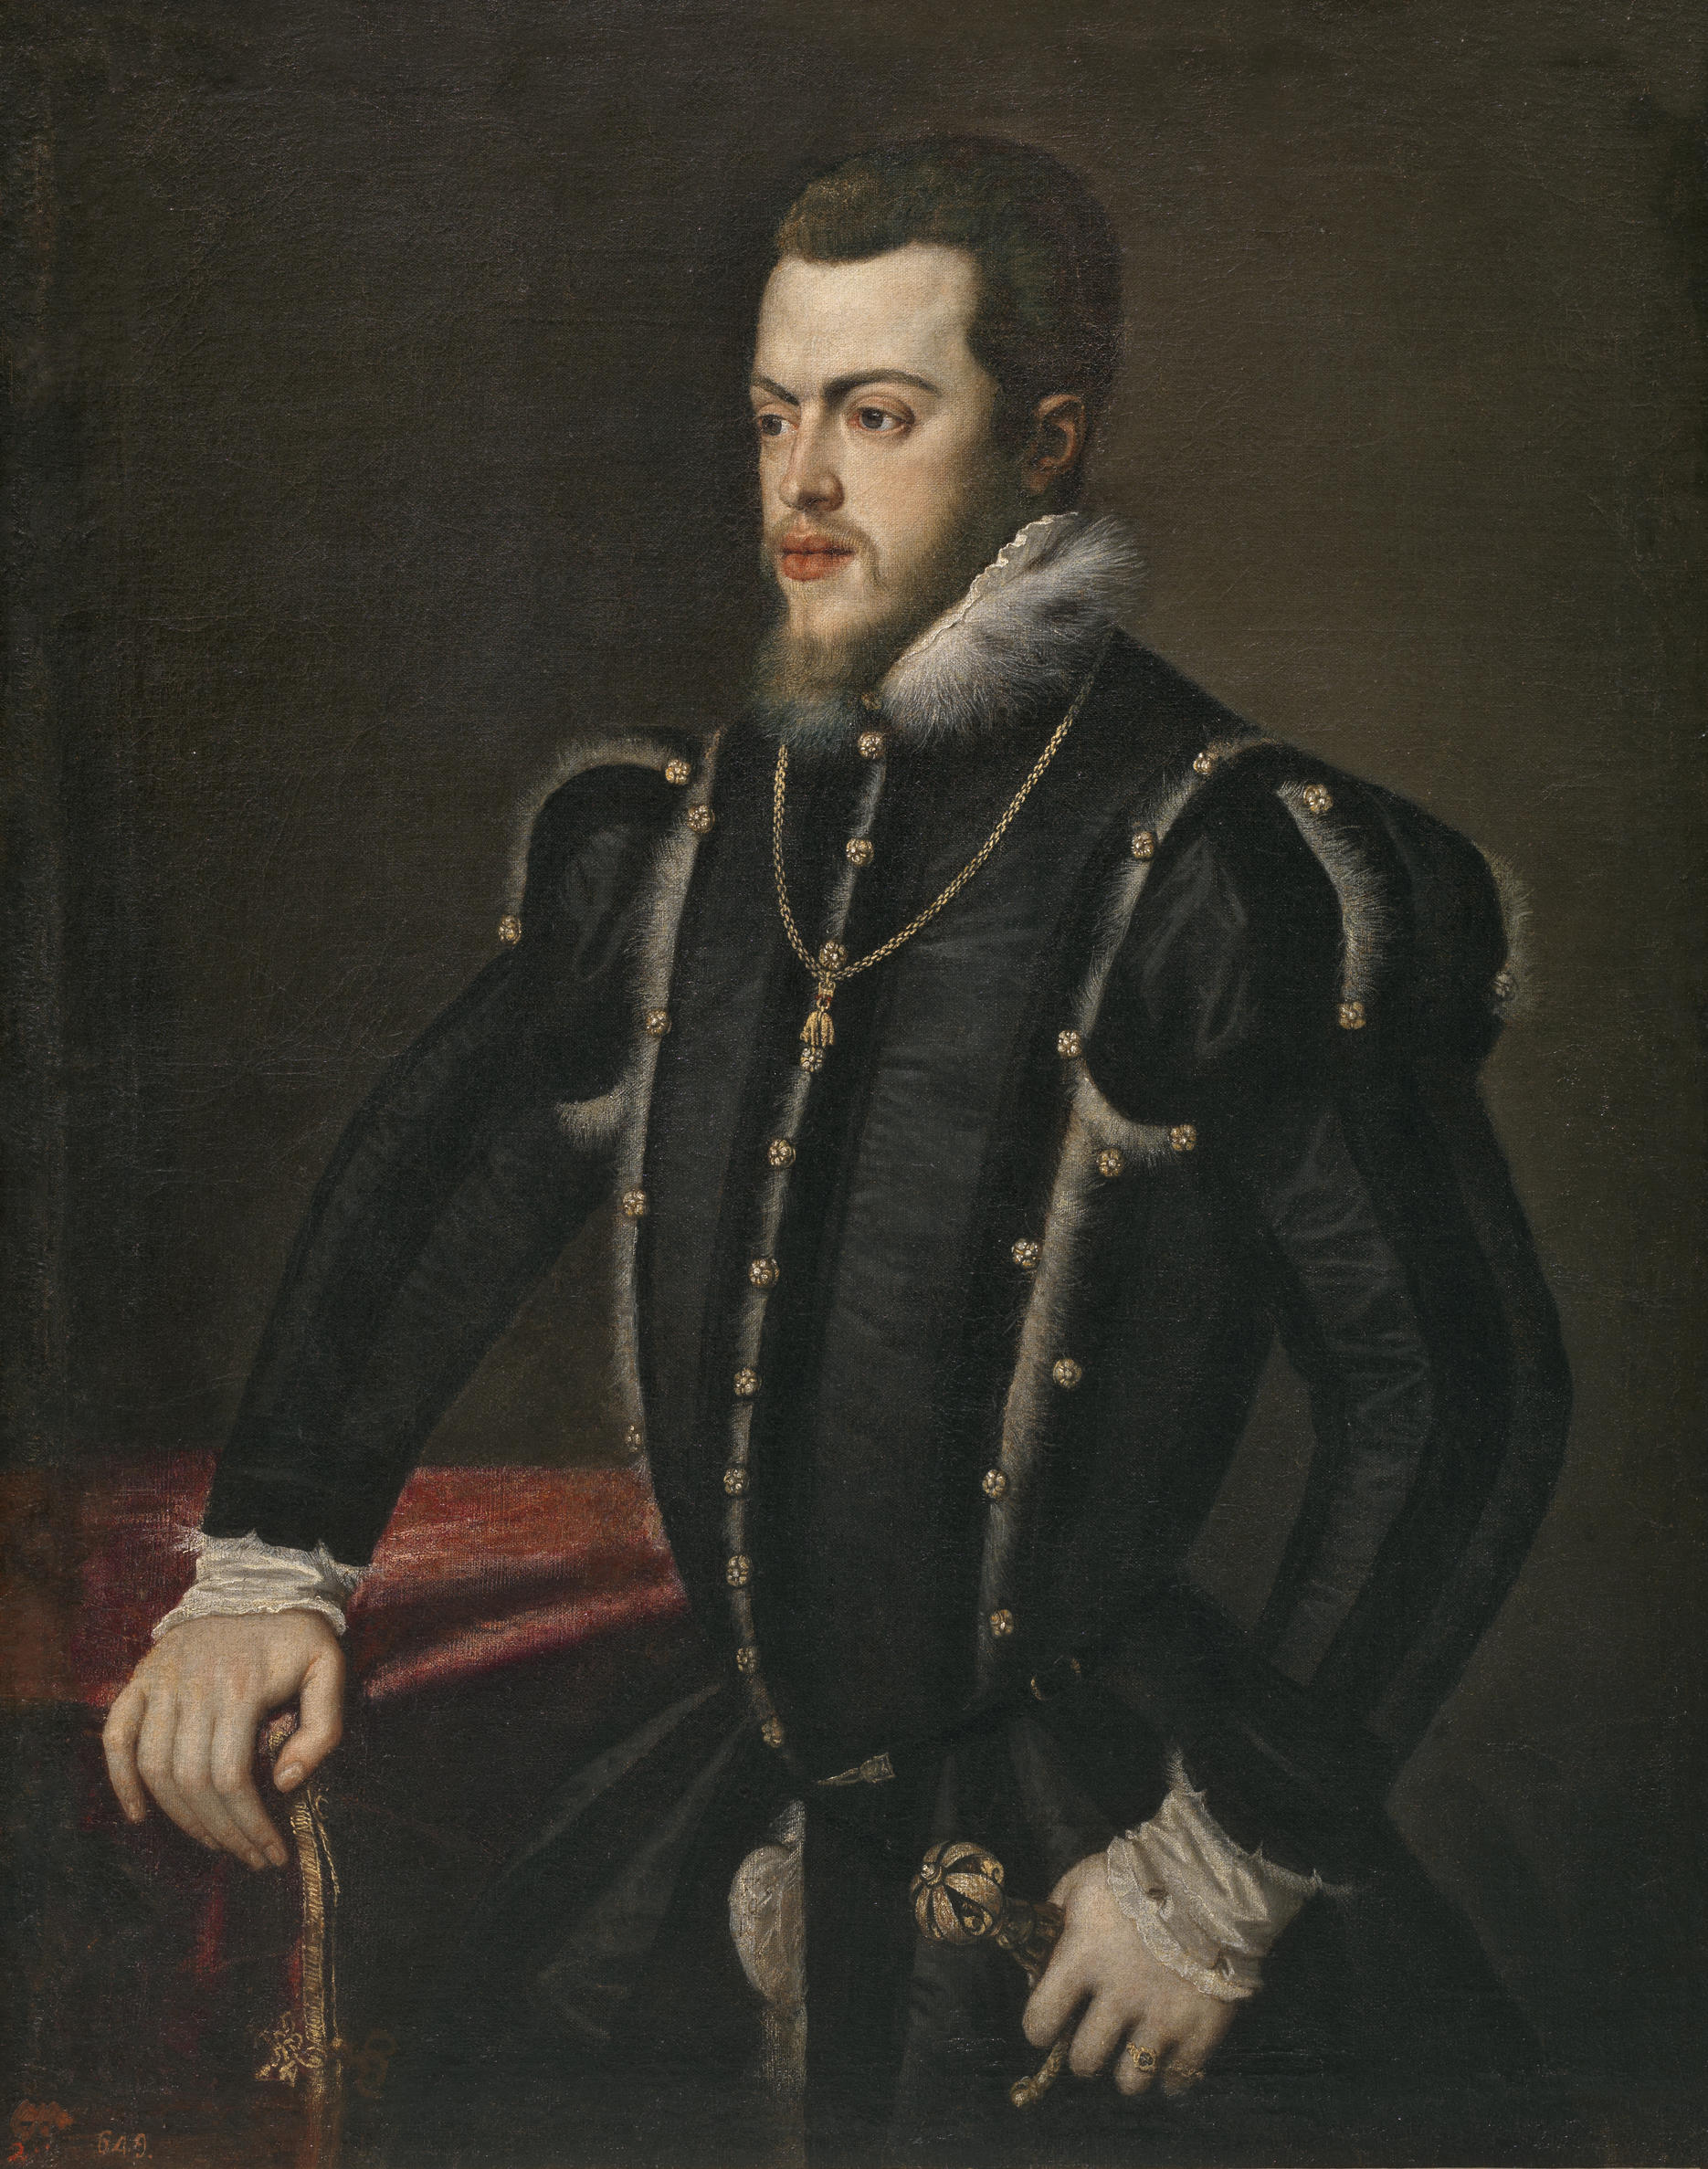 A portrait of Prince Phillip II of Spain.